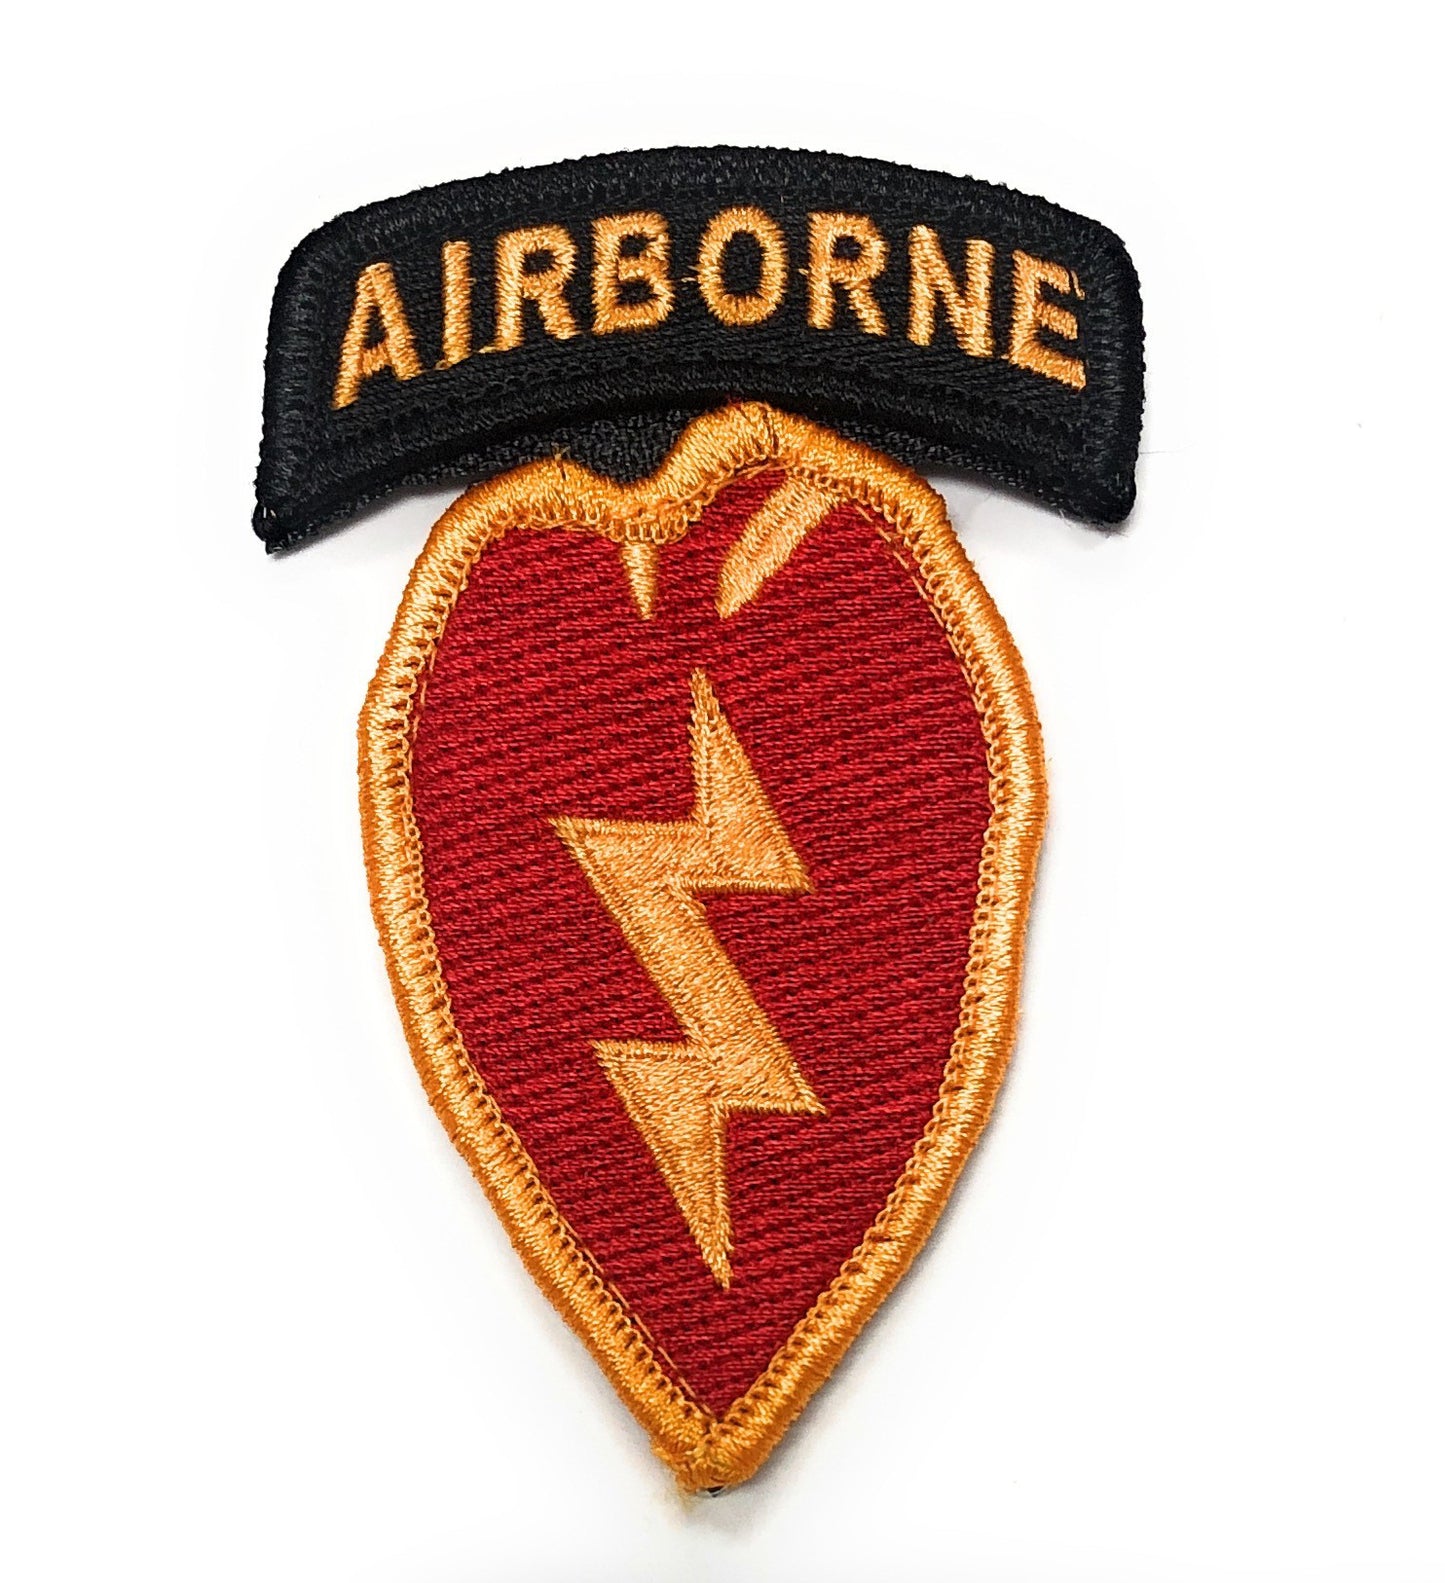 U.S. Army 25TH Infantry Division 4TH BCT Color Patch and Airborne Tab With Hook Fastener (each)